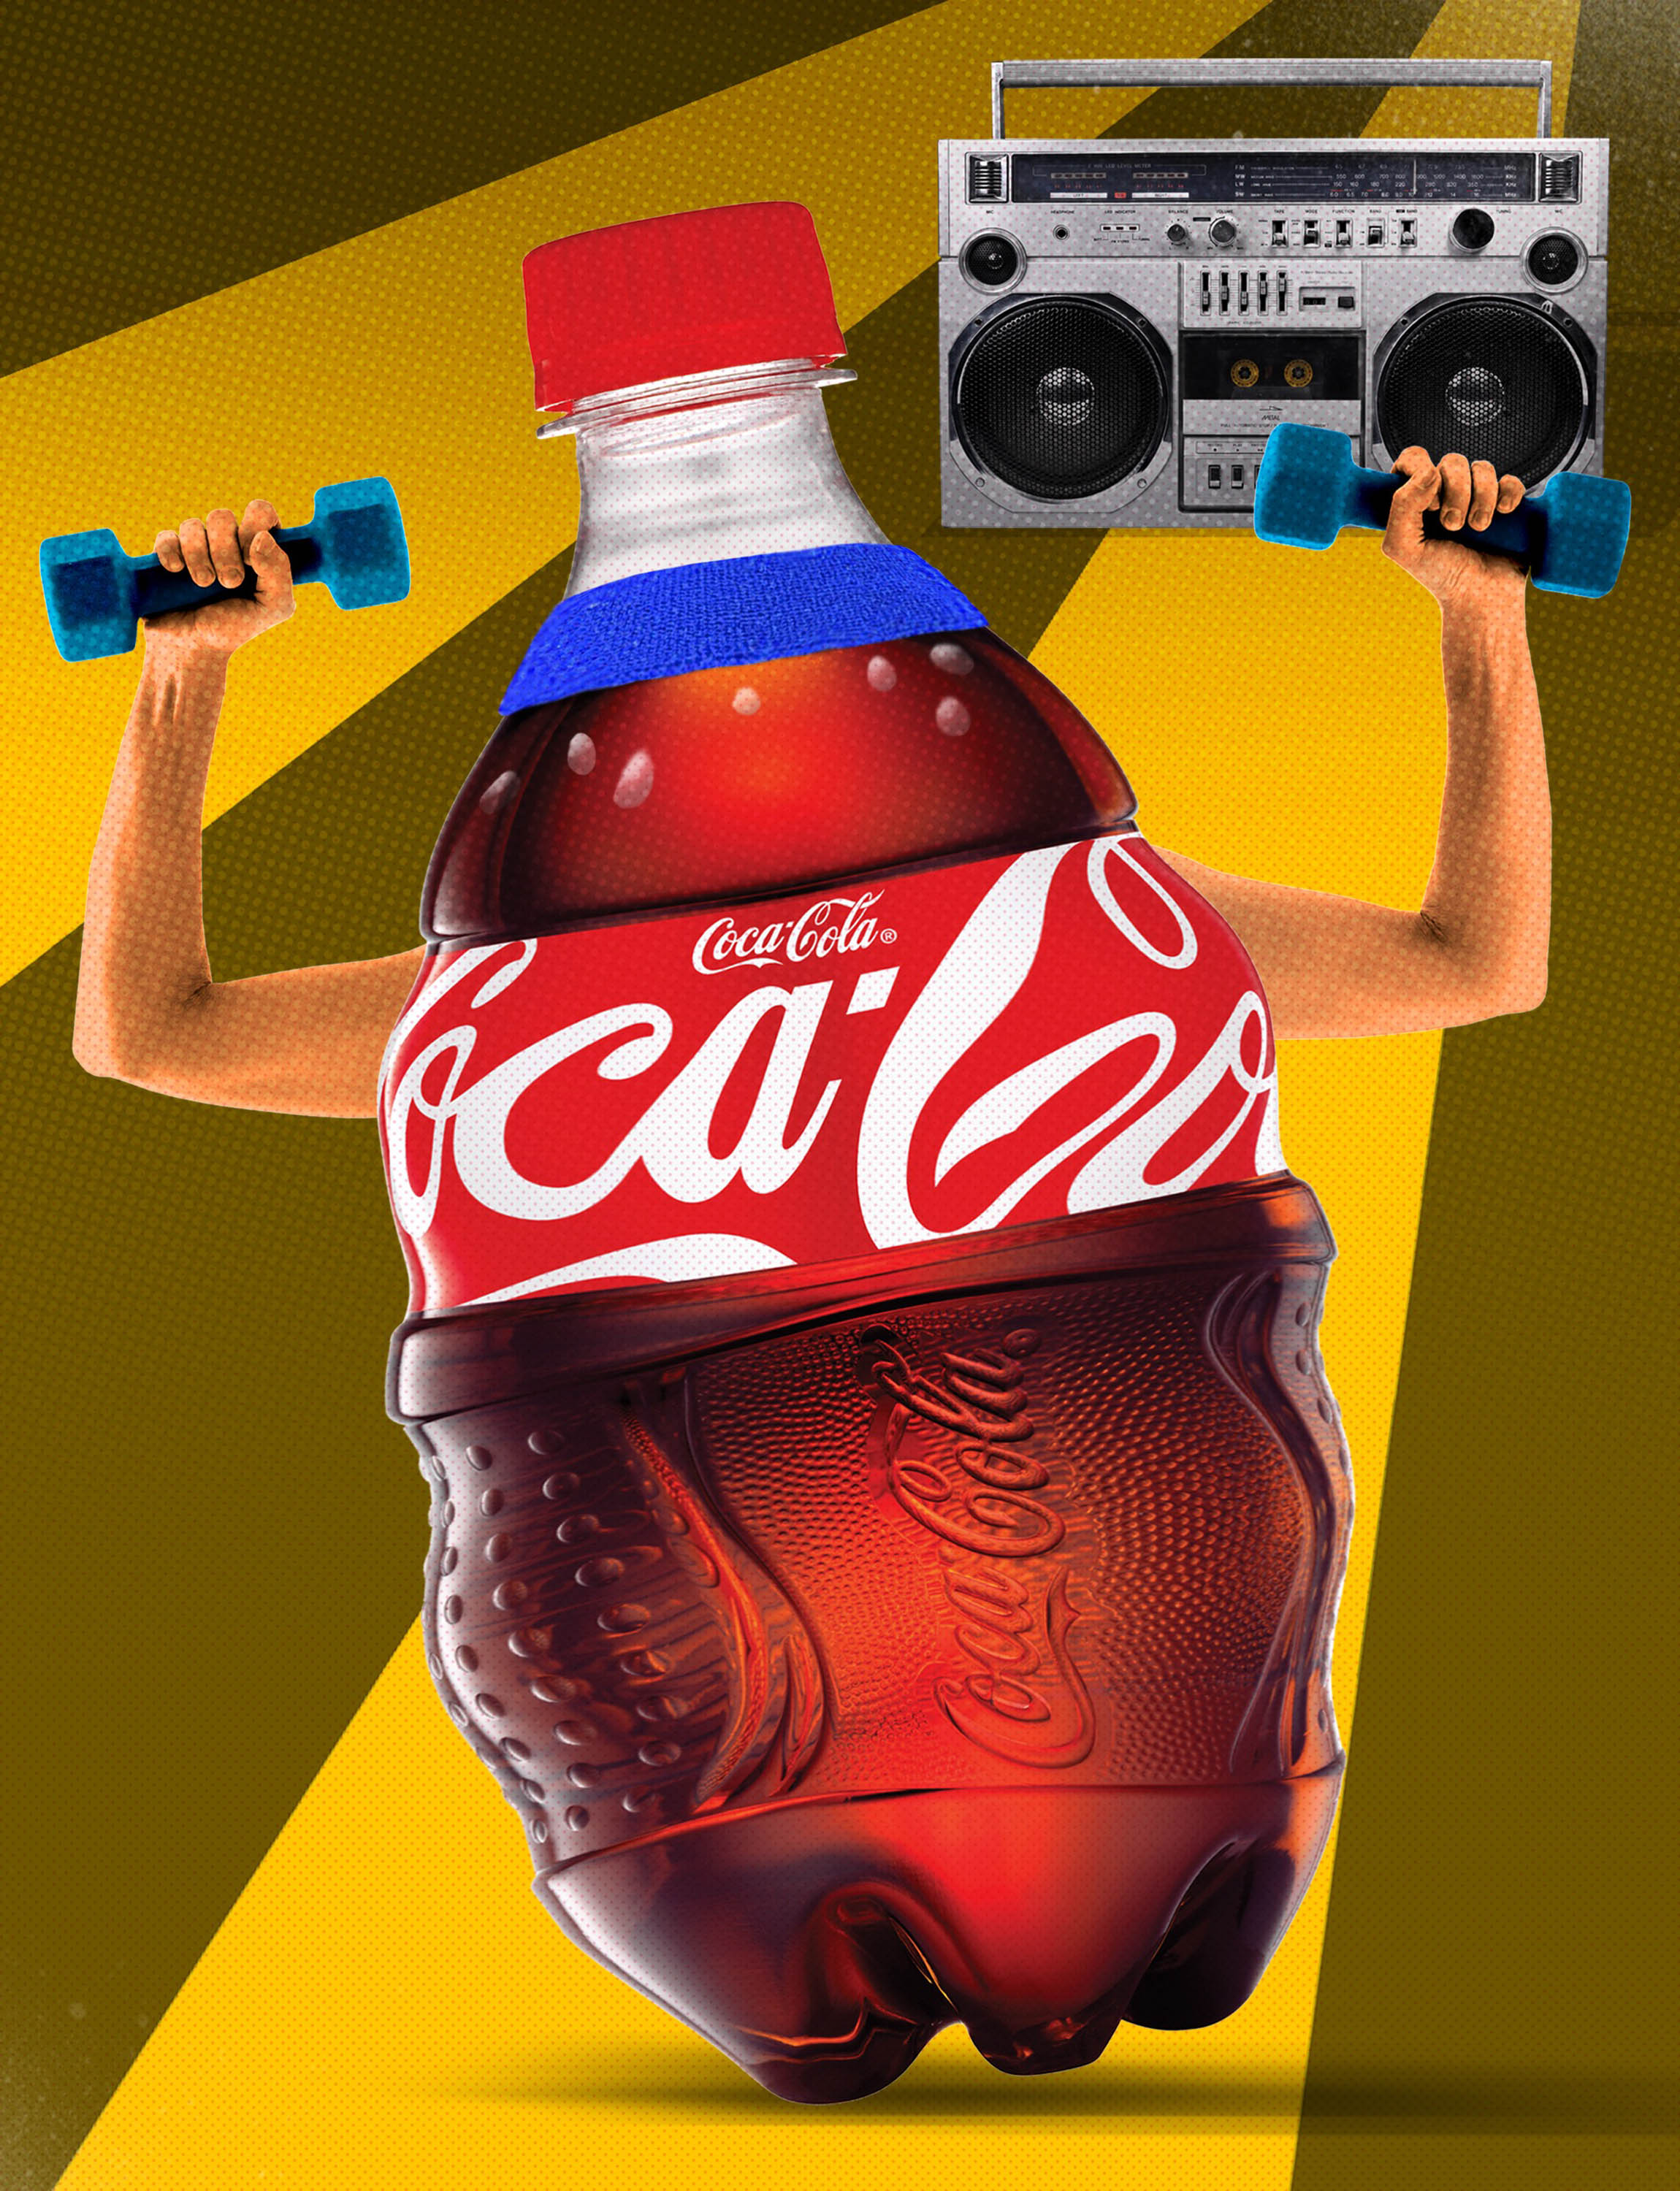 You may not have noticed it yet, but sodamakers are working hard to get you off your couch. (Arms, boom box: Getty Images; Bottle: Coca-Cola; Photo-Illustration by Gluekit for TIME)